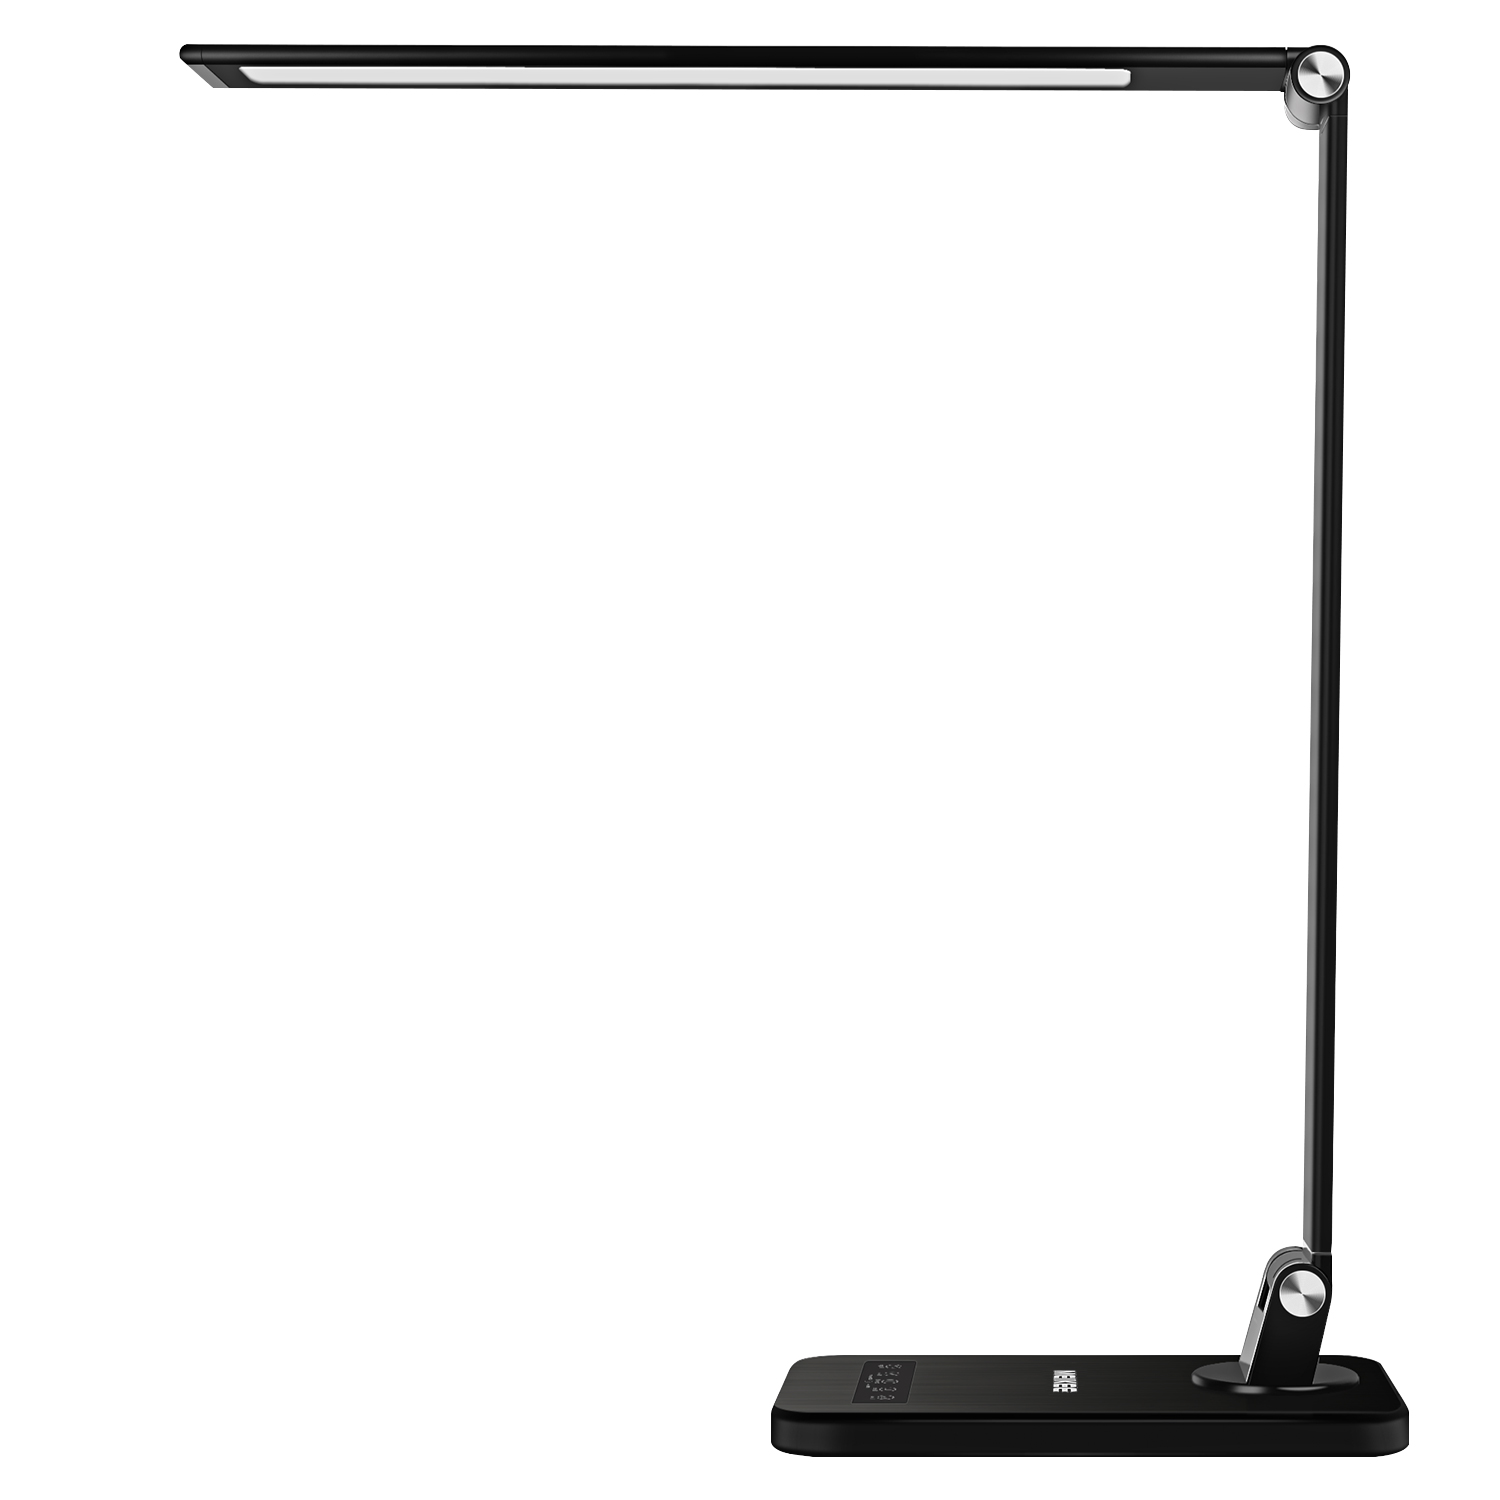 MEIKEE LED Desk Lamp,Aluminum Dimmable Table Lamp,5 Lighting Models with 8 Brightness Levels,Touch Control and Memory Function,30min/60min Auto Timer,5V/1A USB Charging Port,12W,Black